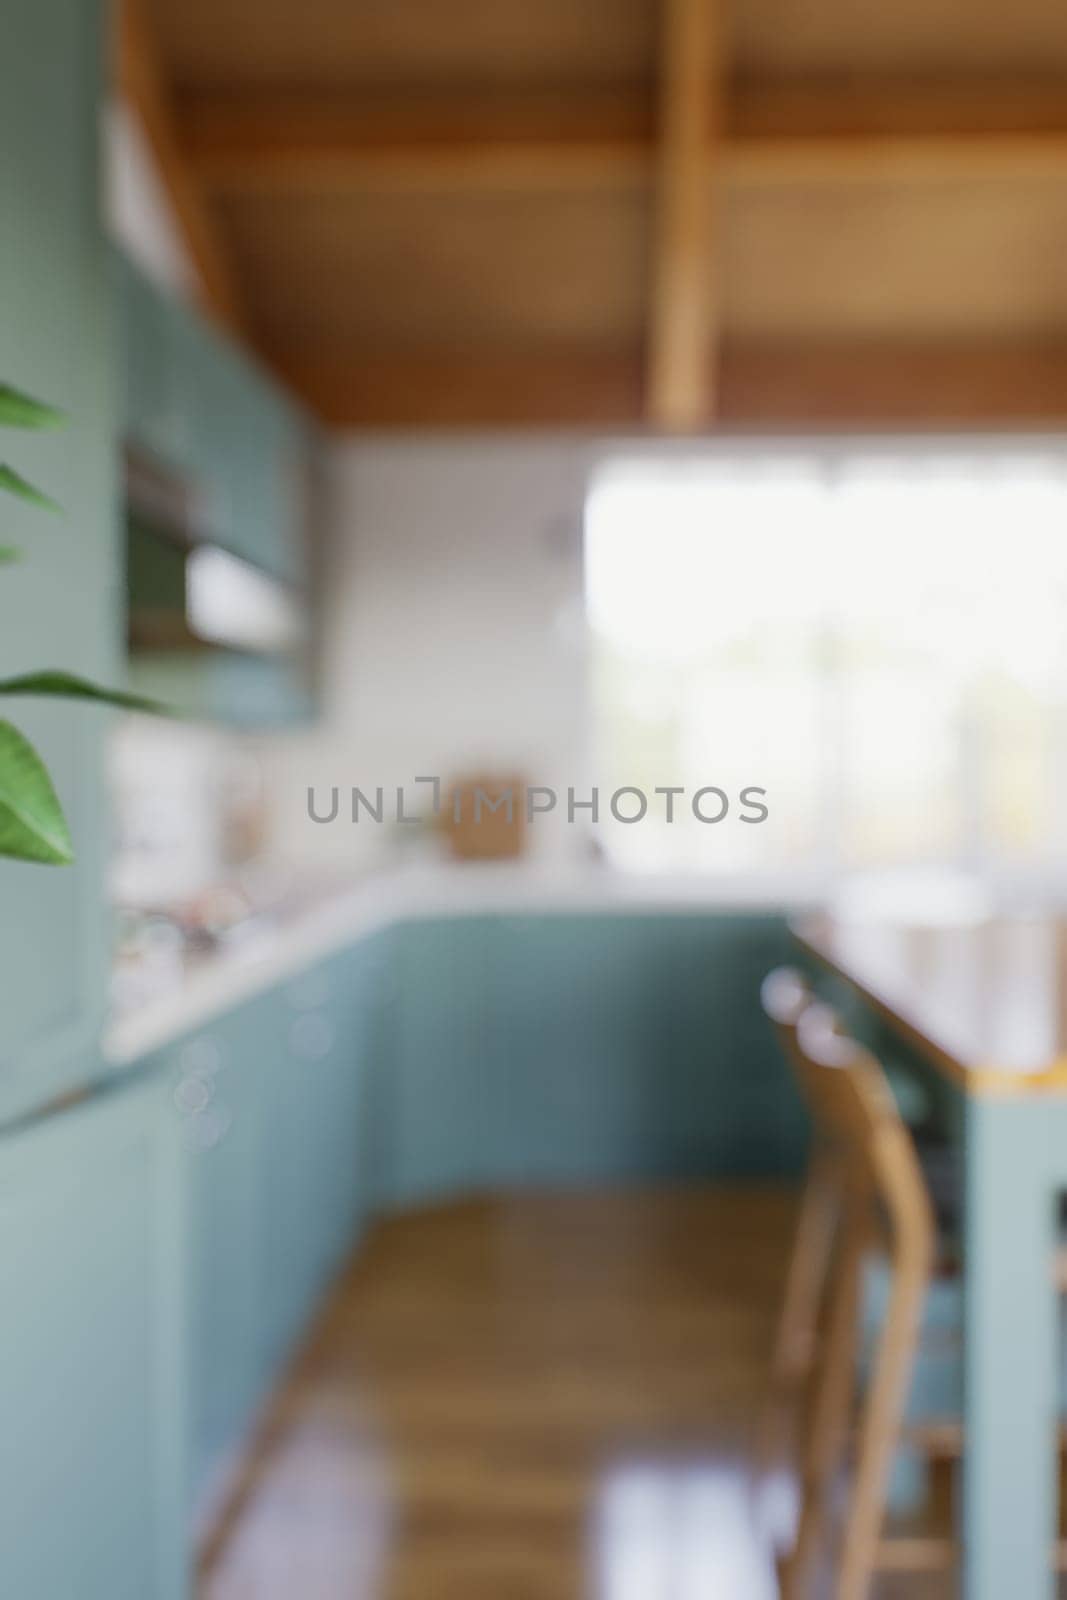 The large green kitchen is out of focus. Green kitchen interior in bokeh. 3D rendering